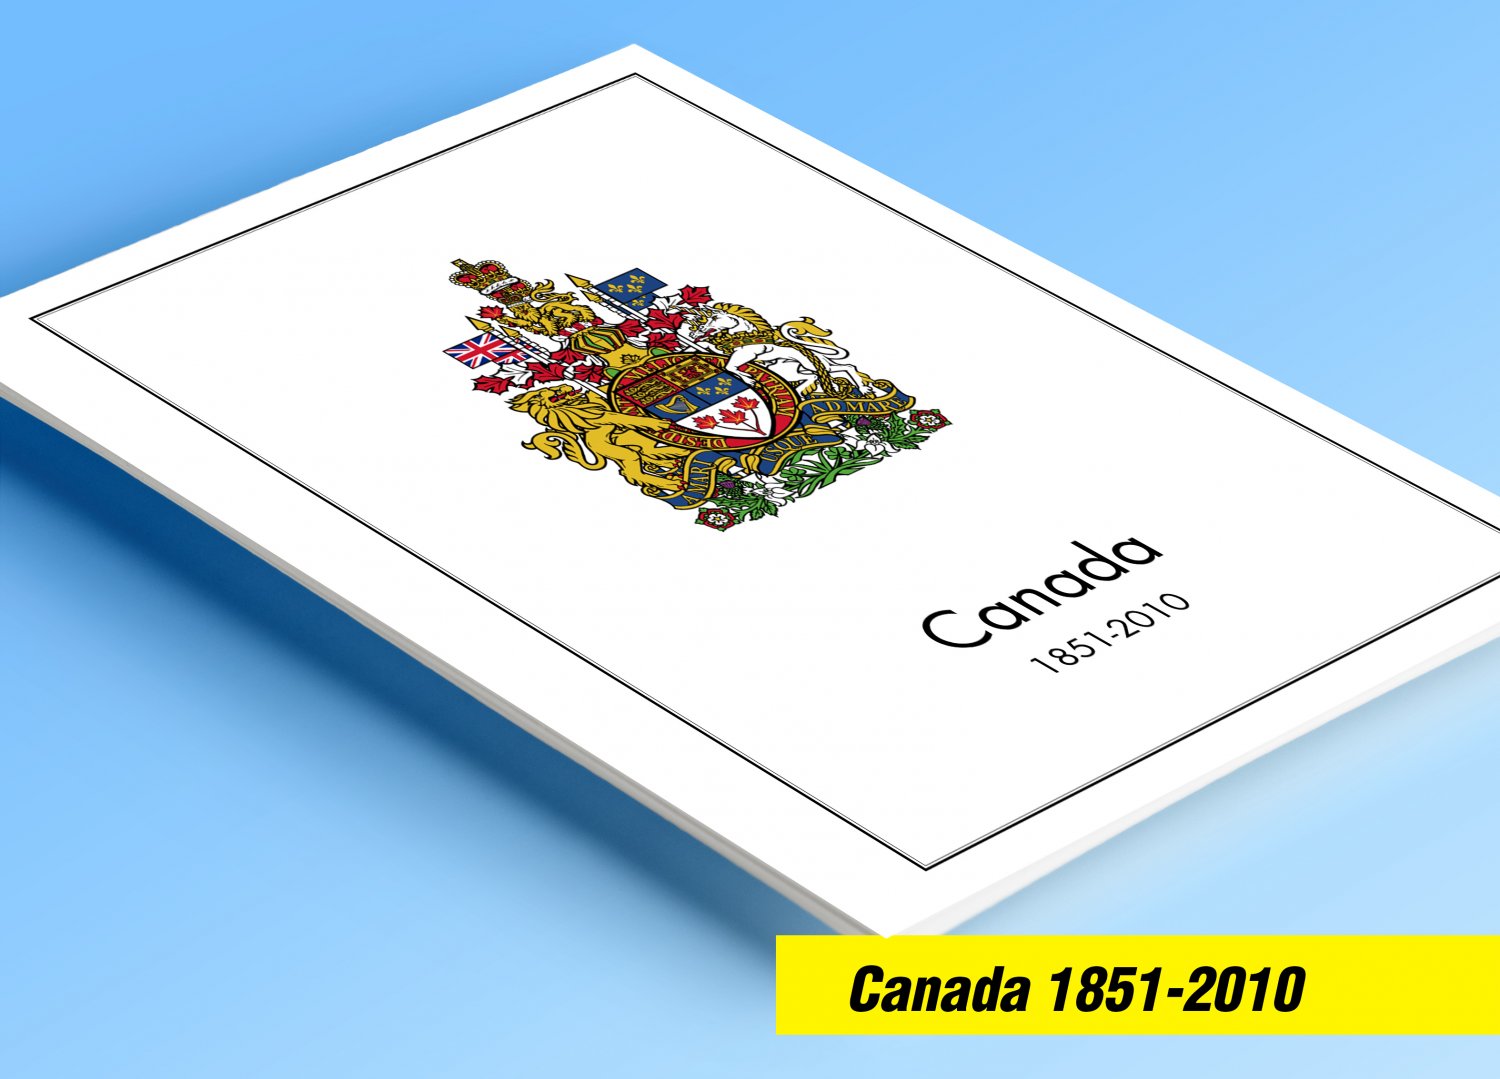 COLOR PRINTED CANADA 1851-2010 STAMP ALBUM PAGES (373 illustrated pages)